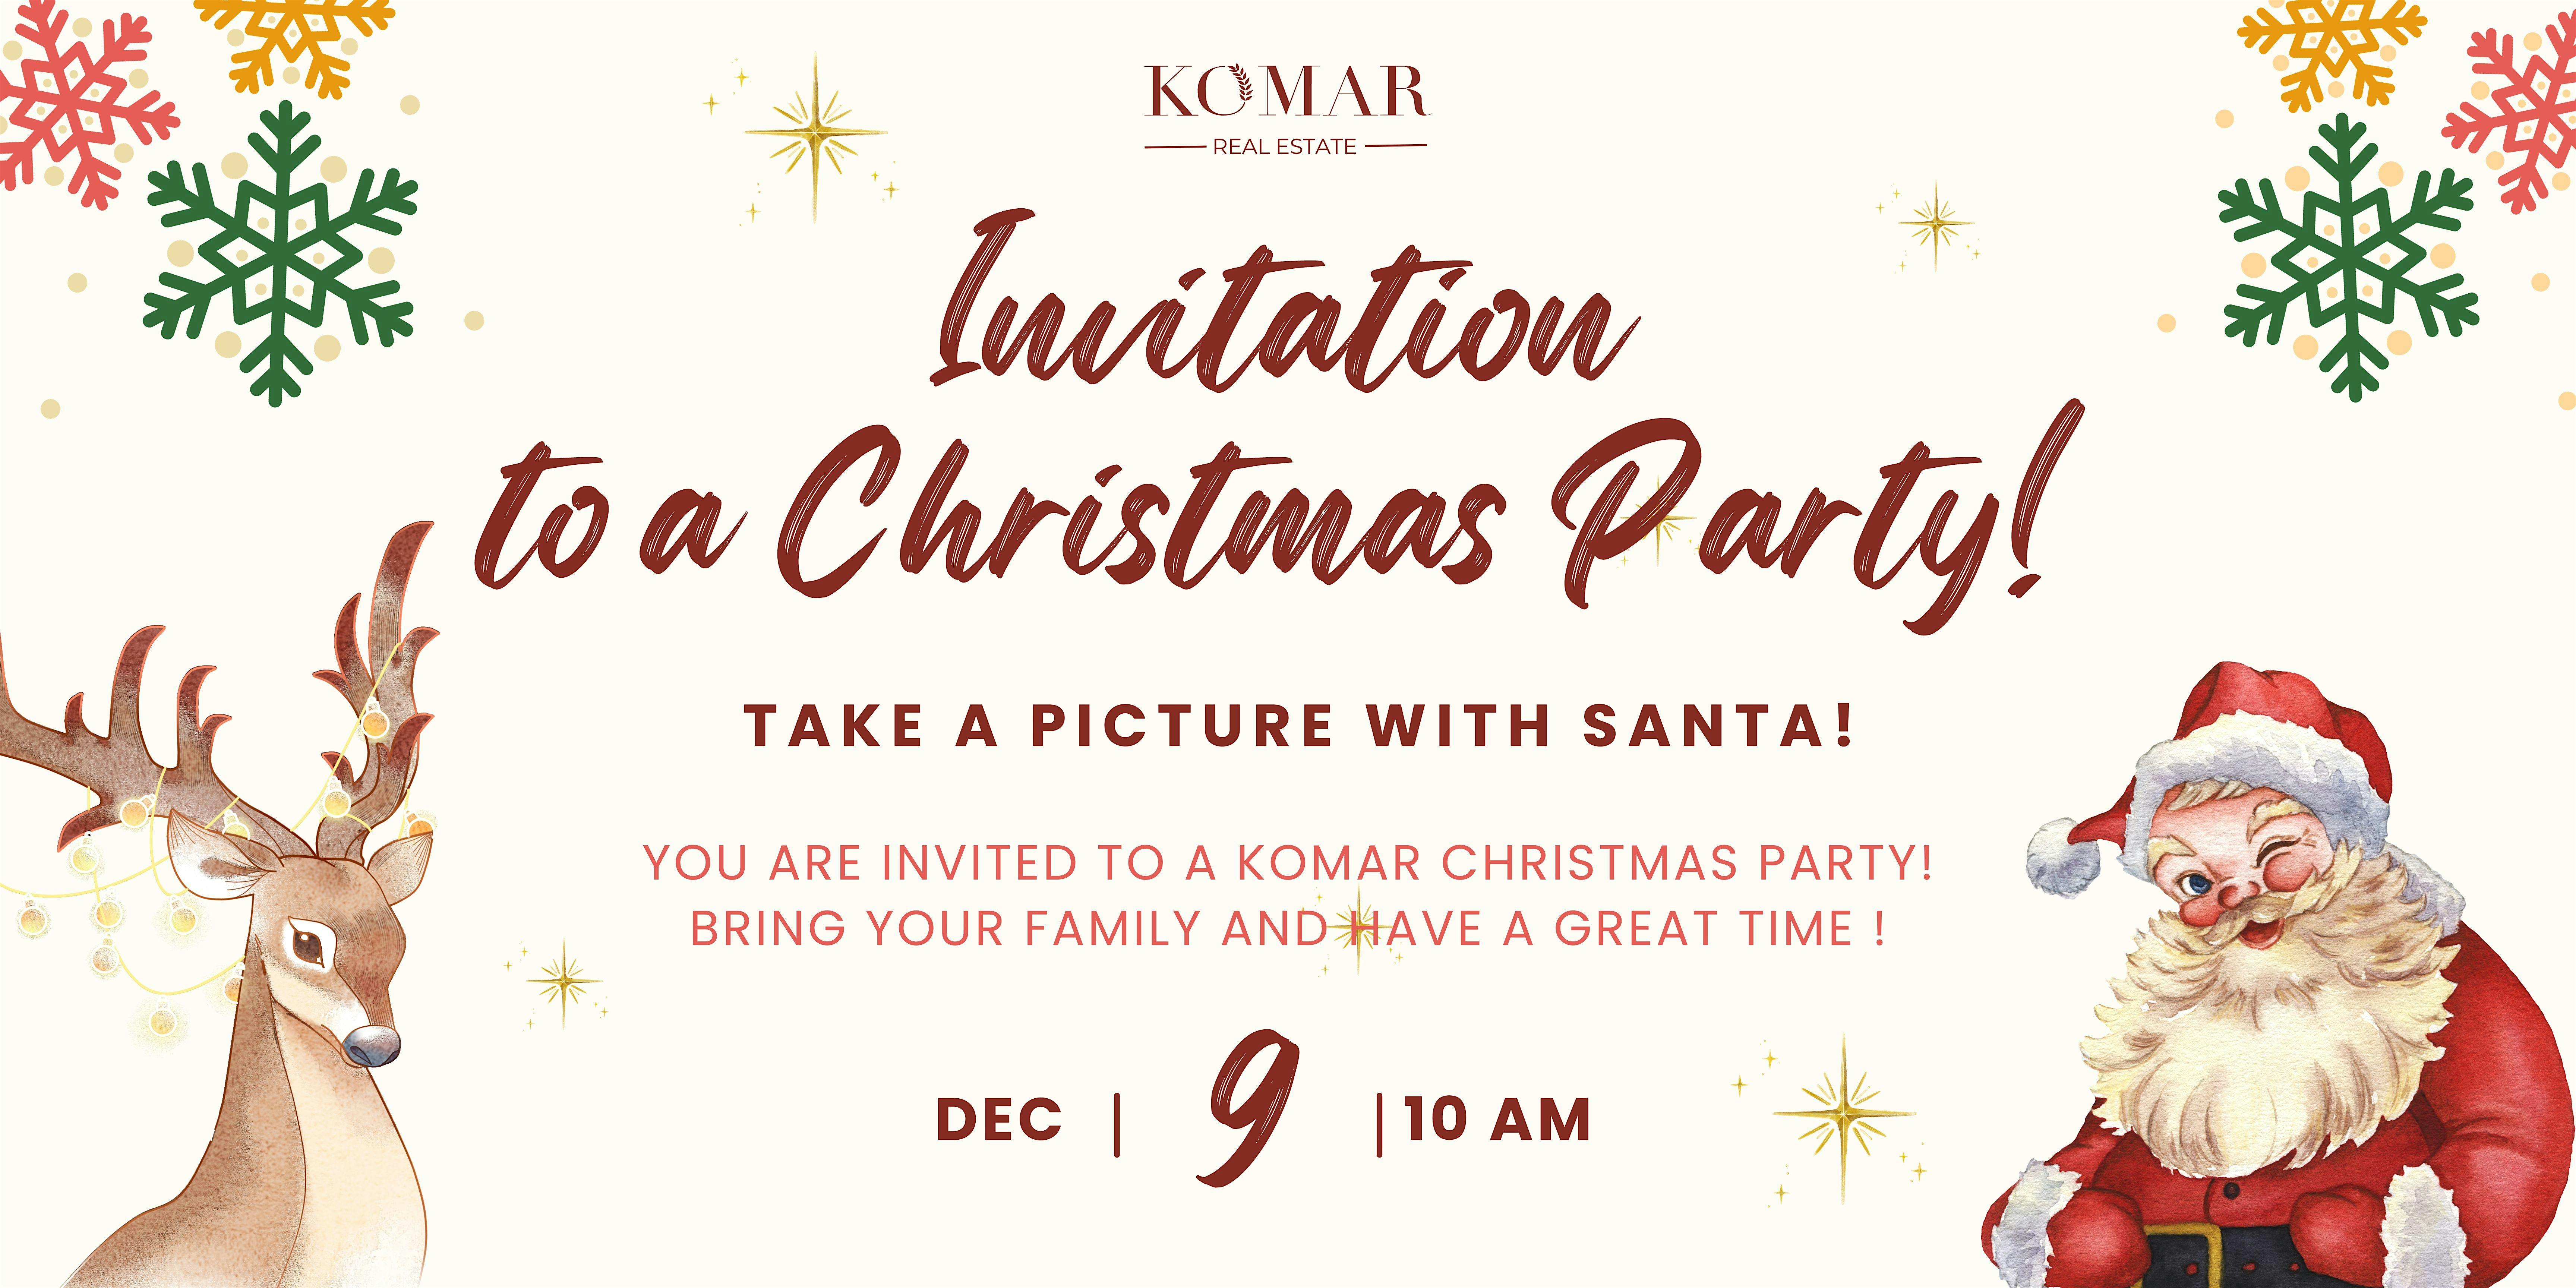 Christmas party with KOMAR